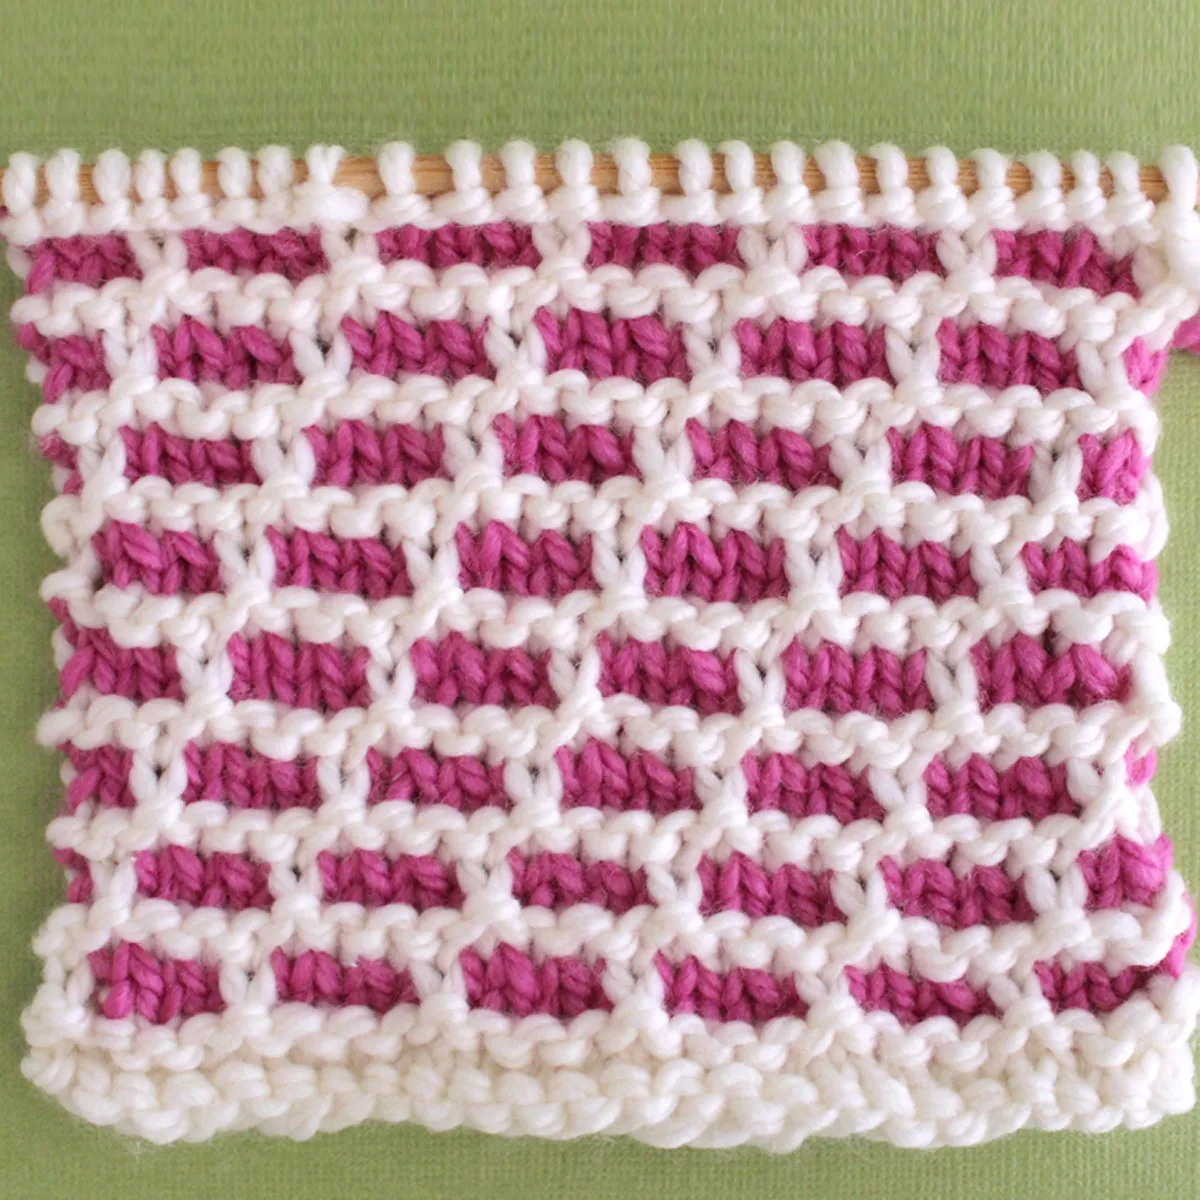 Brick Stitch Knitting pattern swatch in pink and white yarn colors.